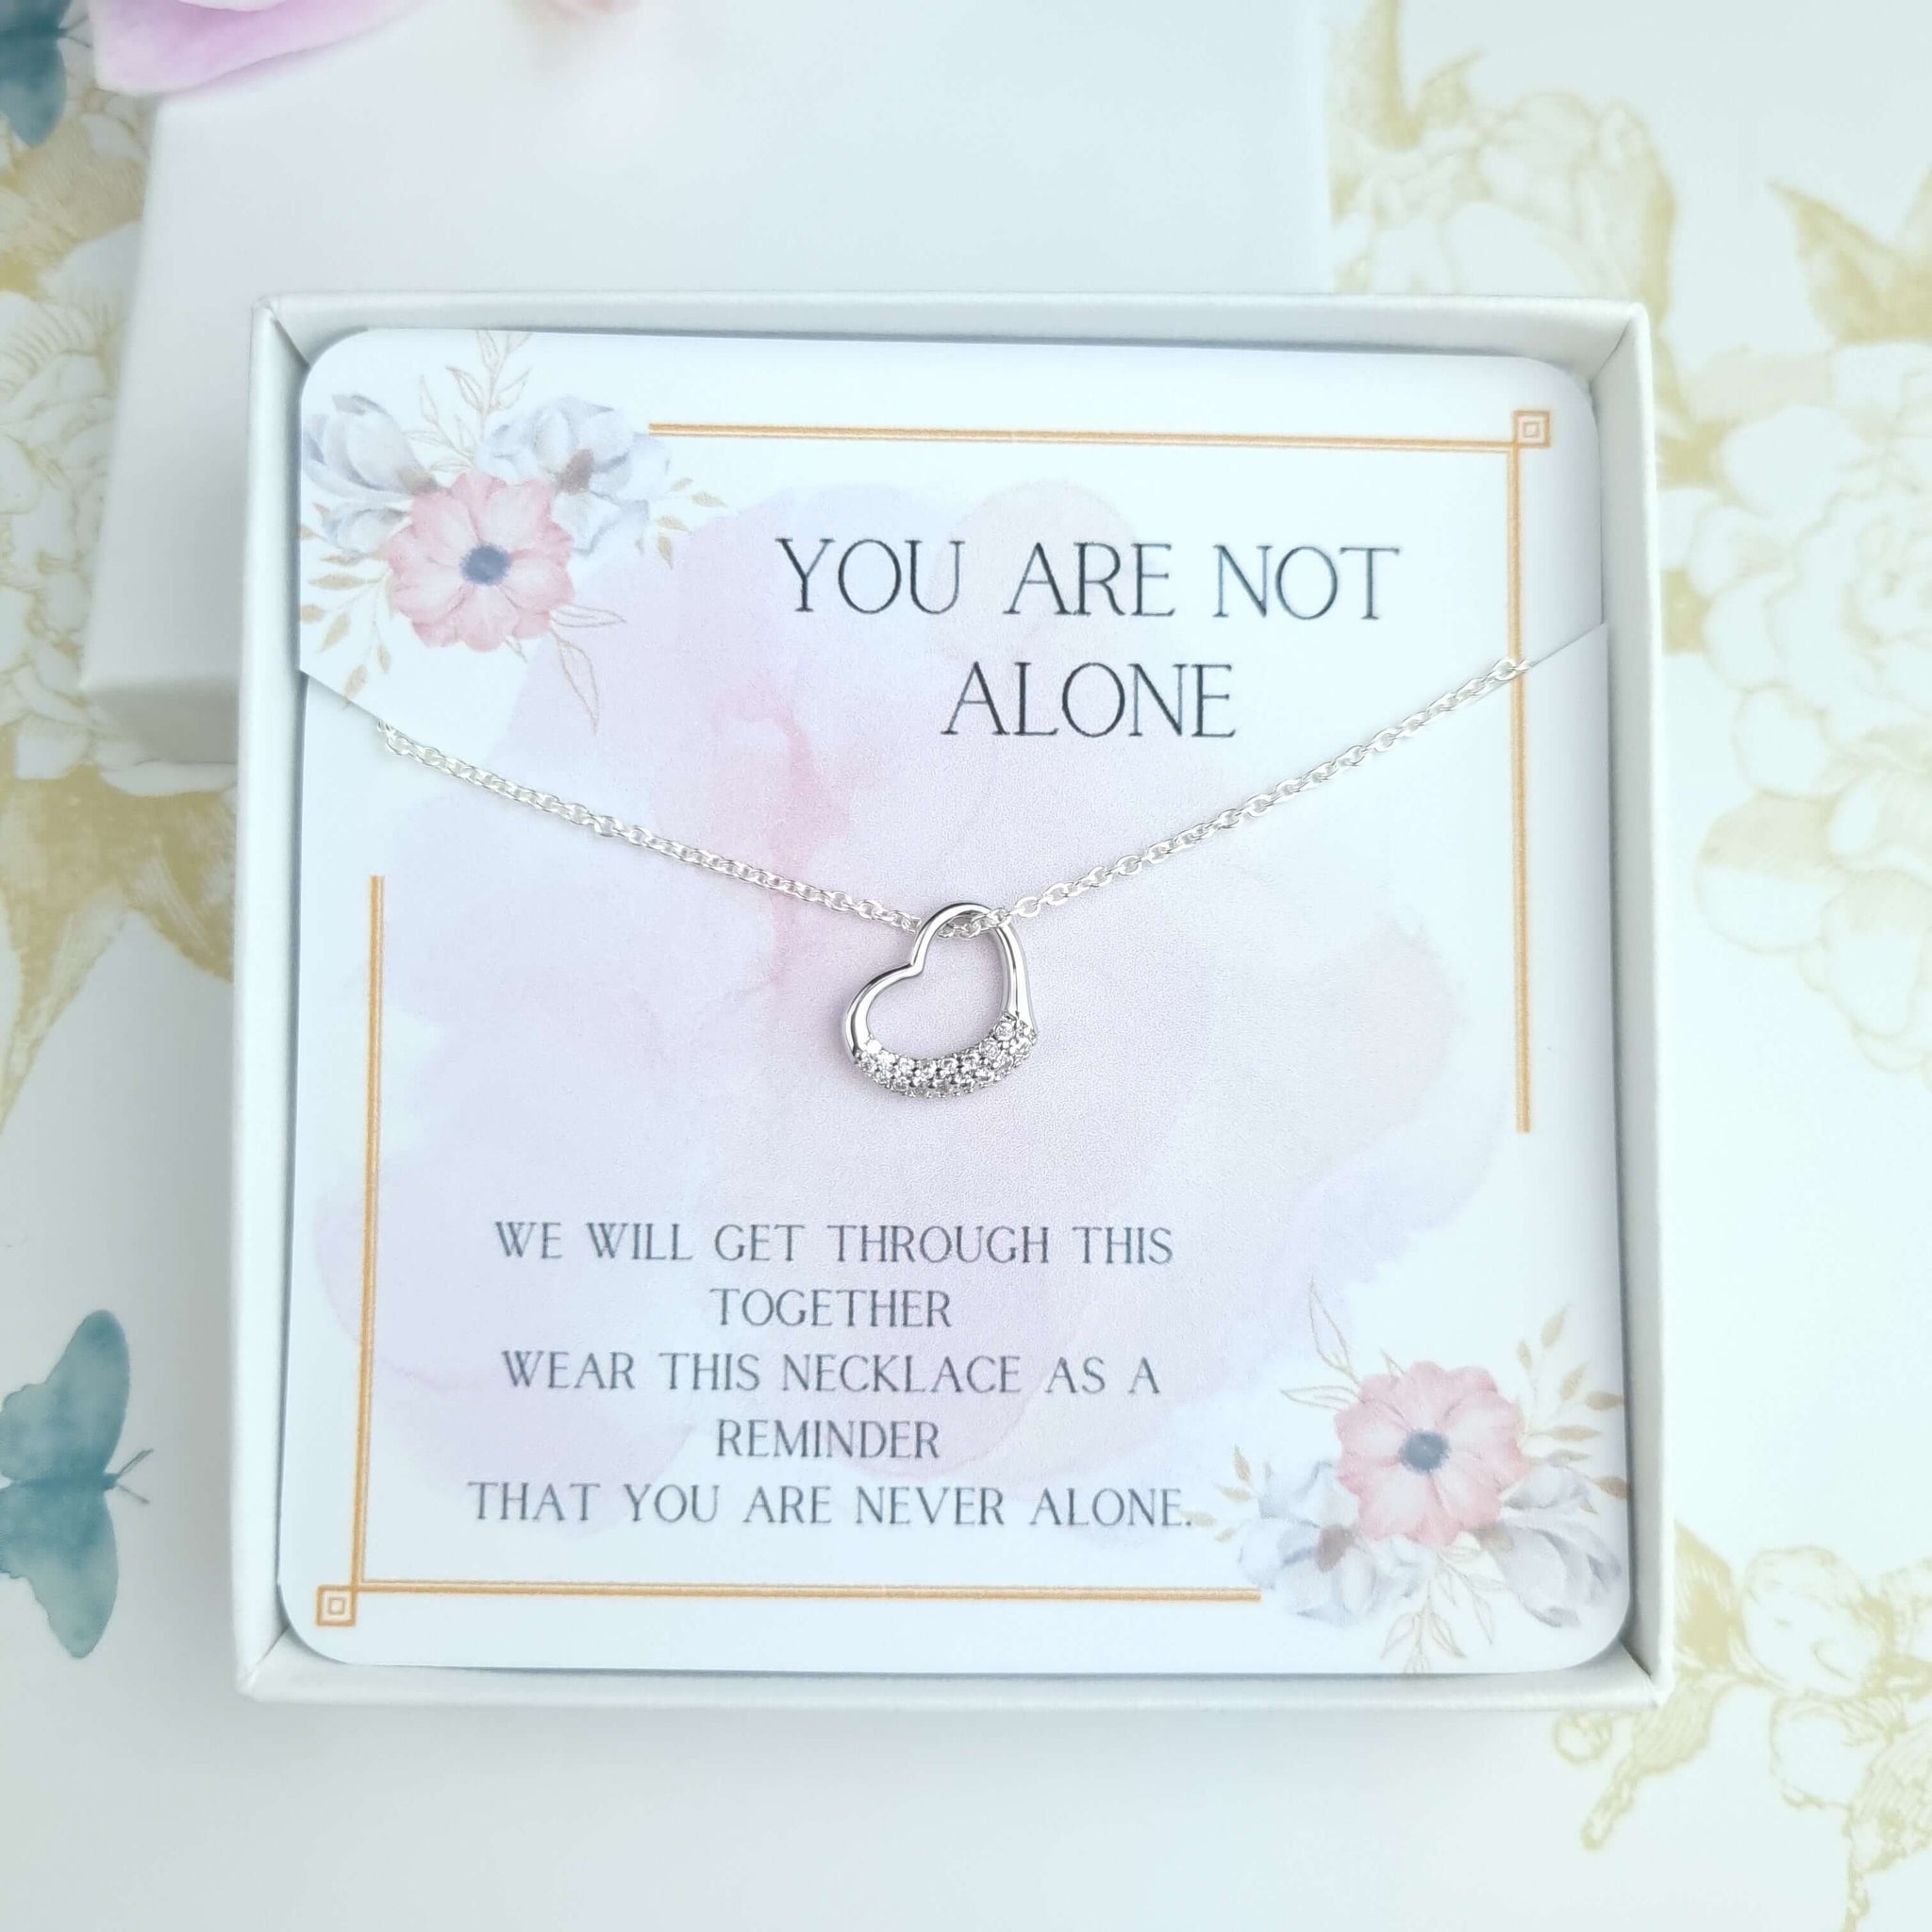 you are not alone gift, sterling silver heart necklace with message and gift box